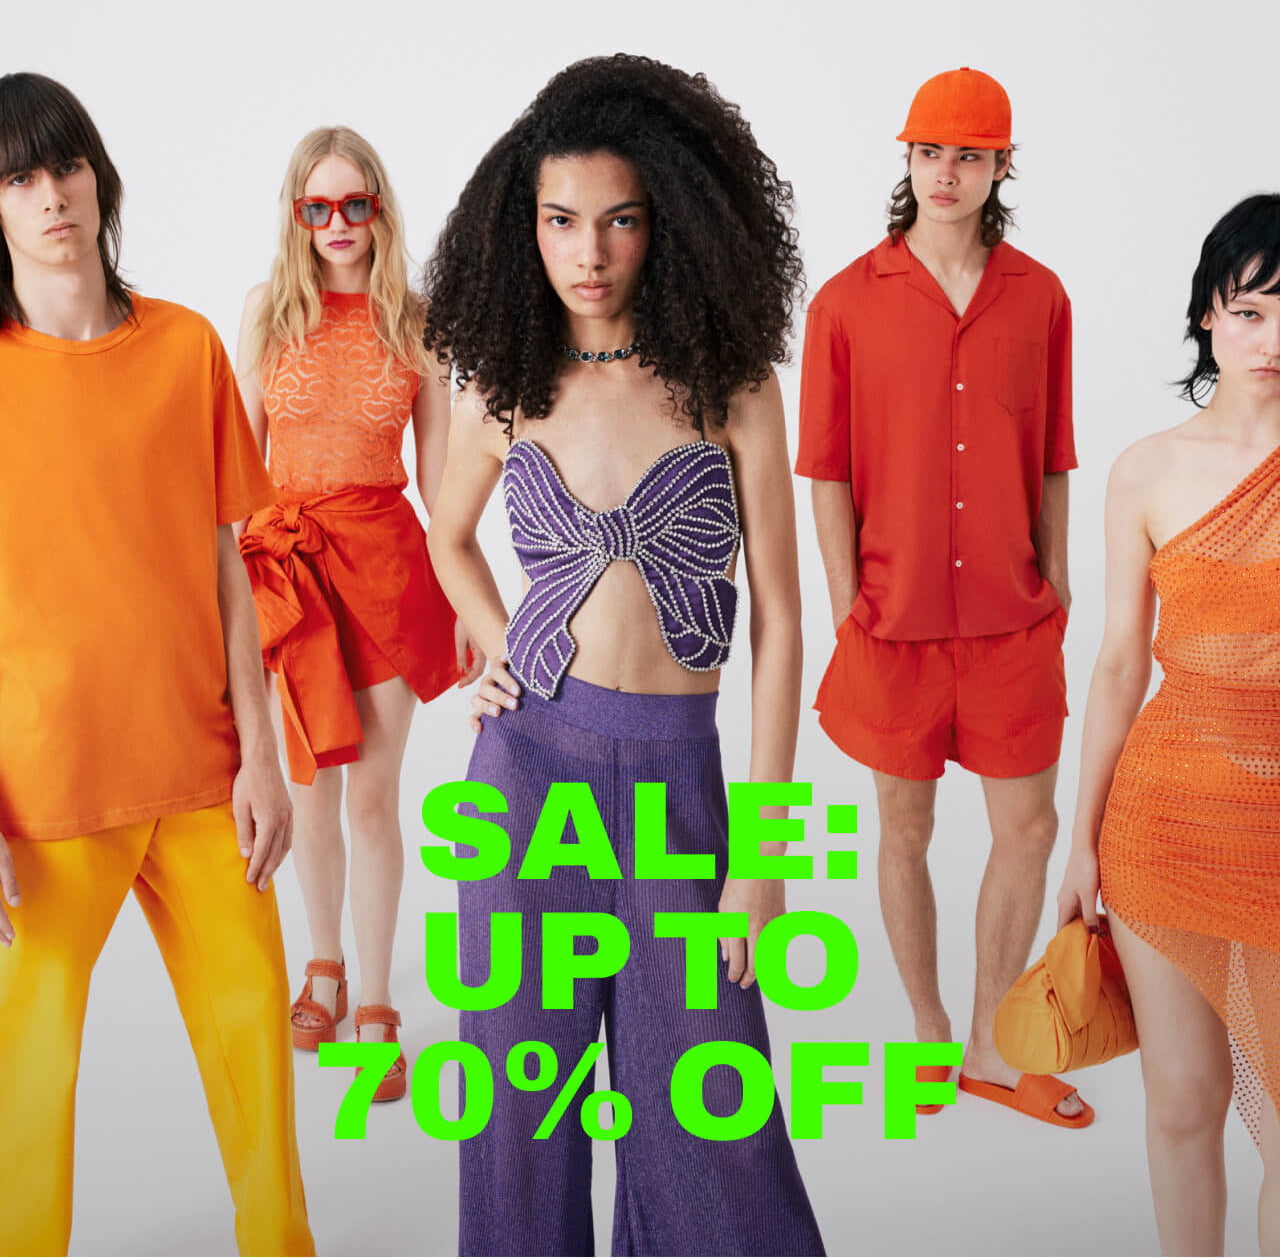 Up to 70% off sale at YOOX